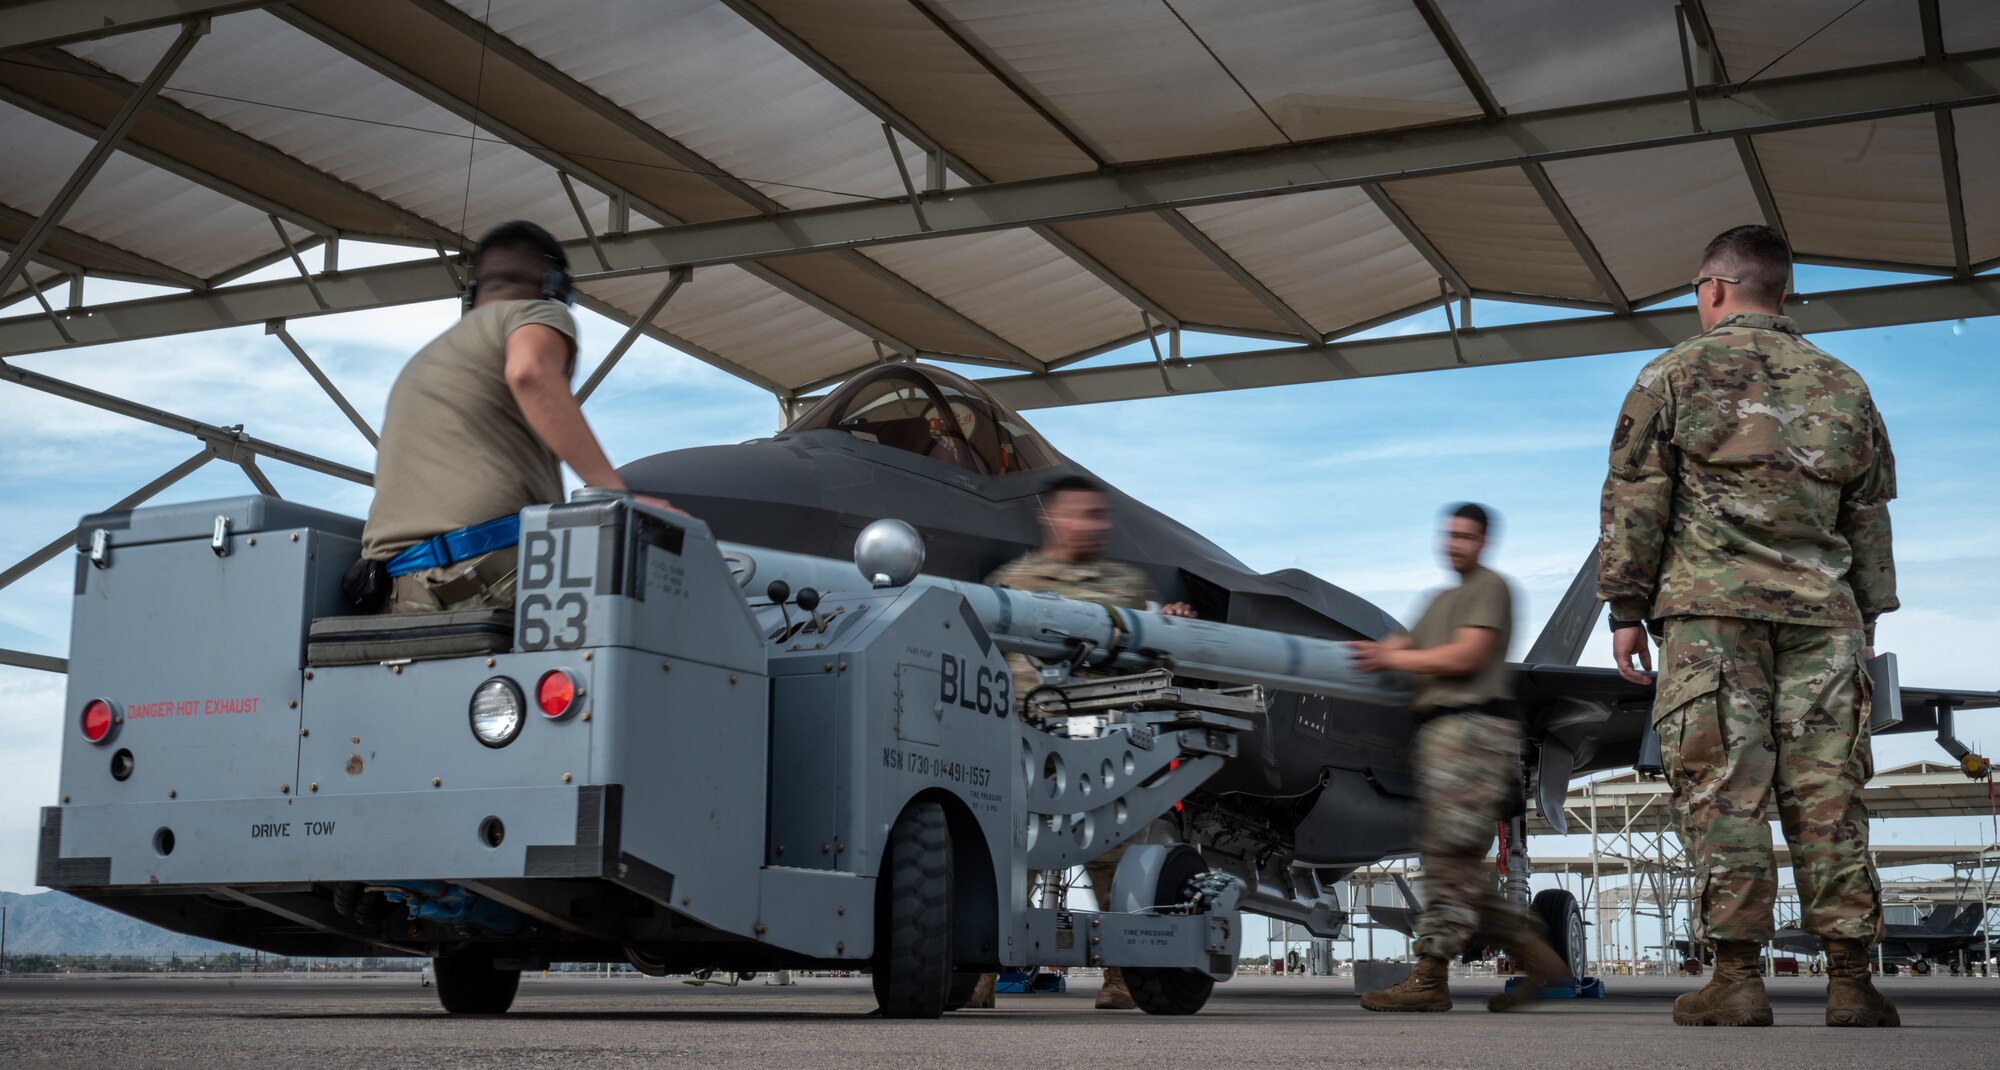 Load crew members assigned to the 62nd Aircraft Maintenance Unit move quickly to load an AIM-9X missile onto an F-35A Lightning II during the Annual Load Crew Competition Jan. 24, 2020, at Luke Air Force Base, Ariz.